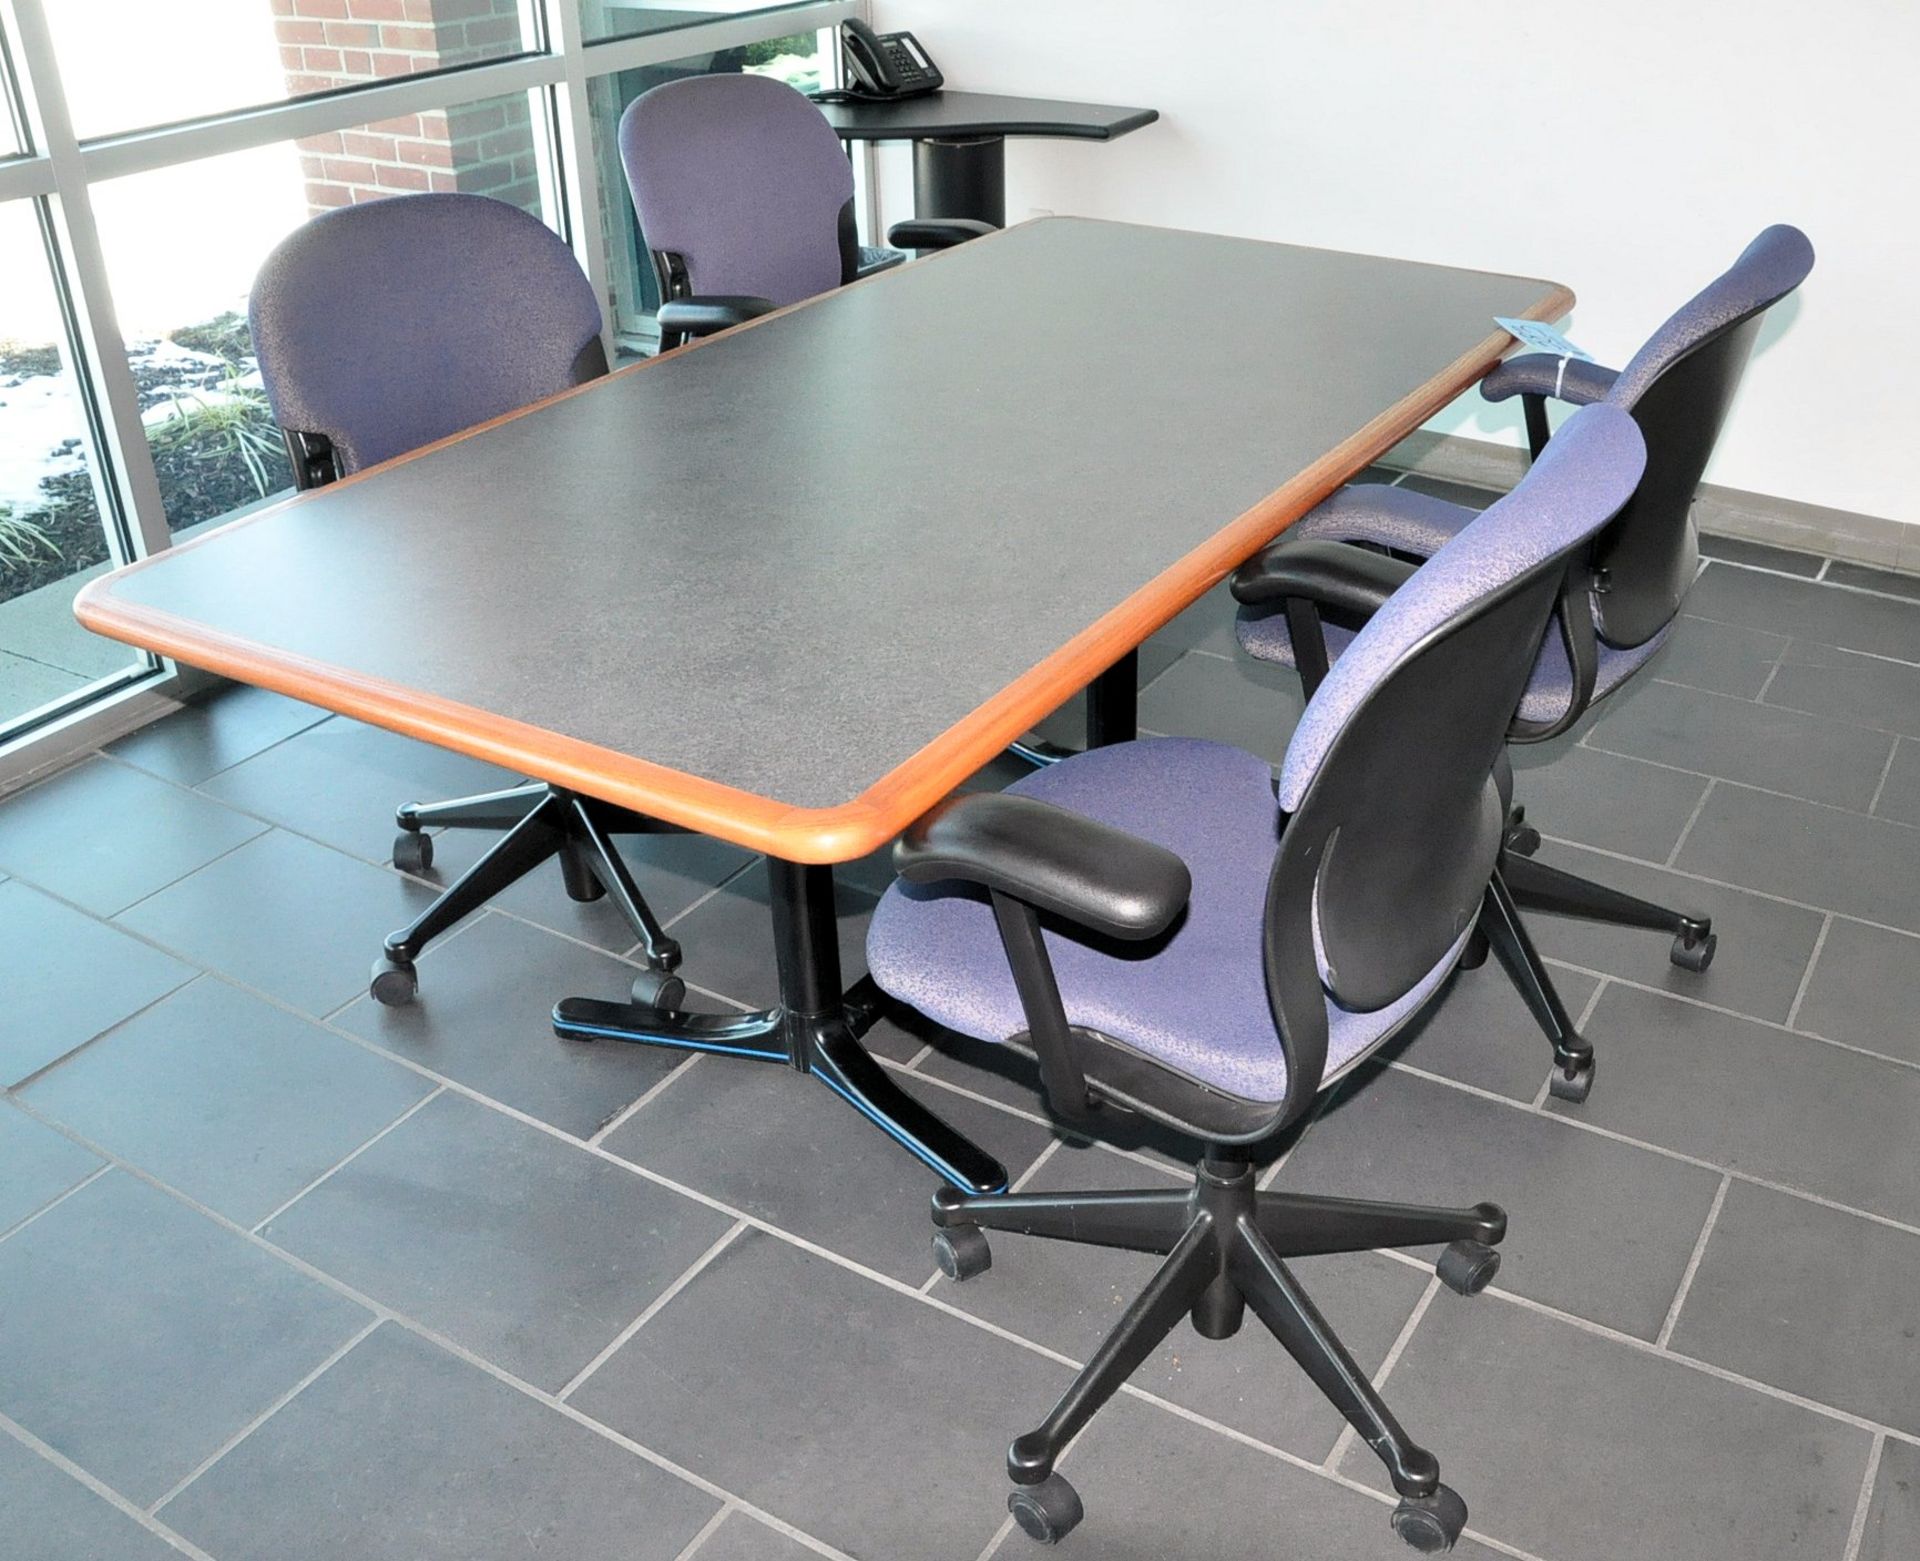 Lot-(1) 36" x 72" Conference Table with (4) Chairs, (No Phone),